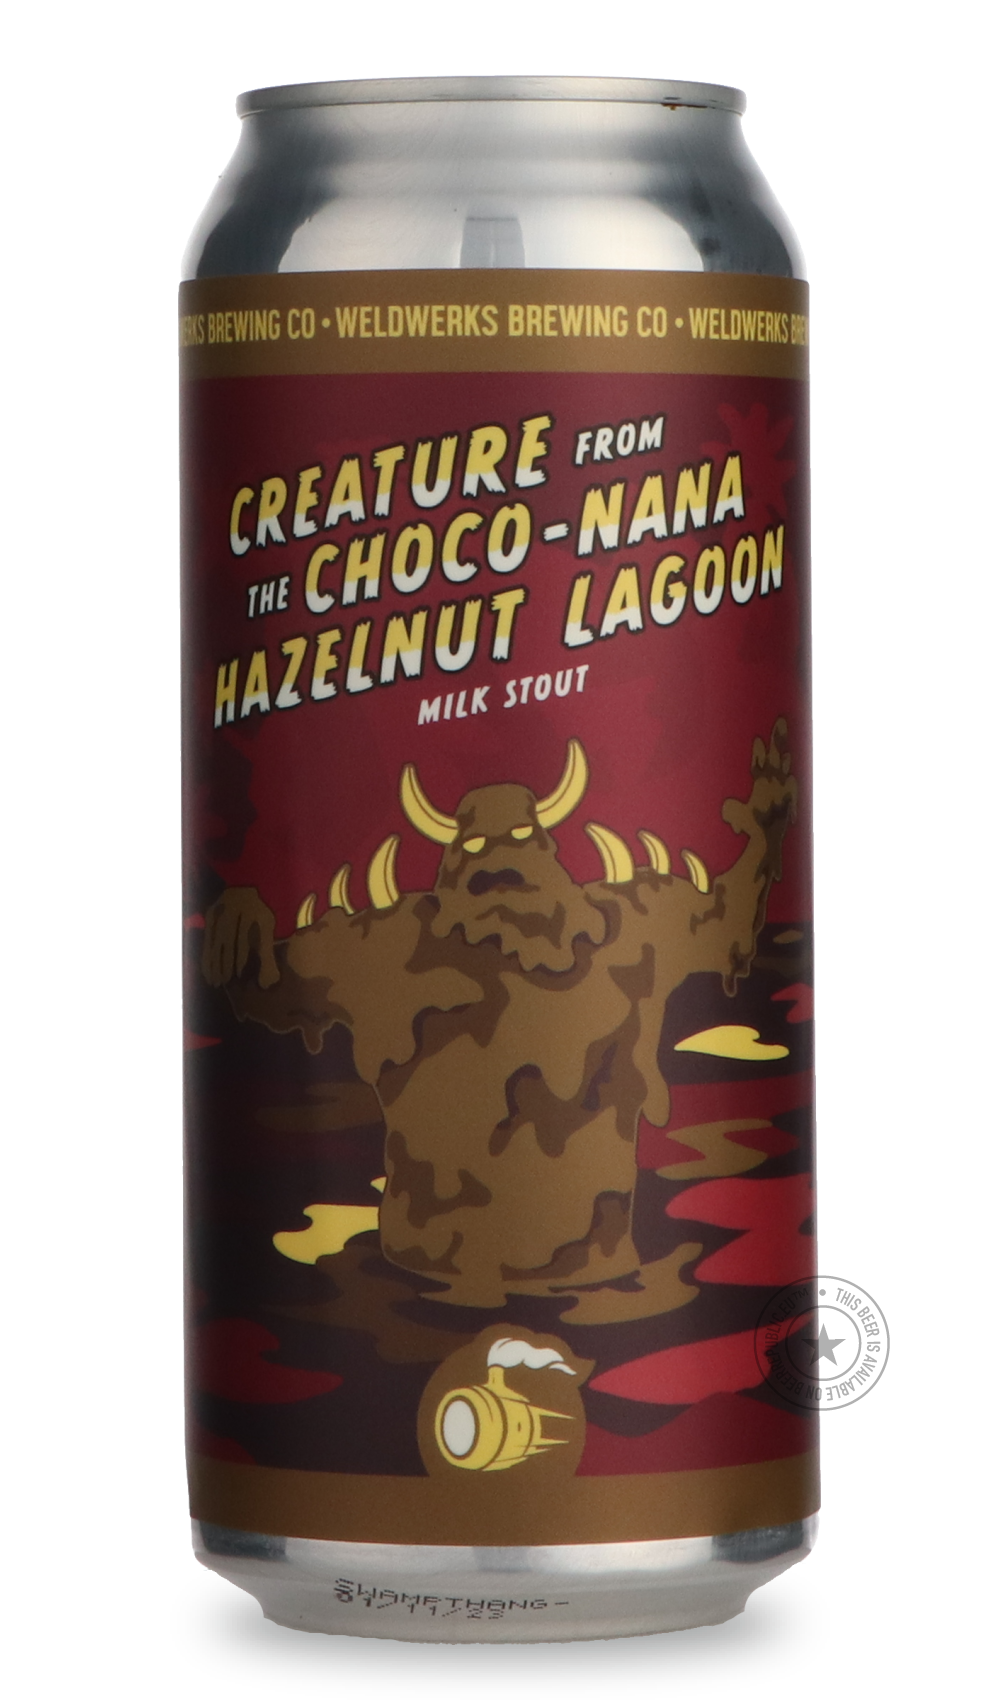 -WeldWerks- Creature From the Choco-Nana Hazelnut Lagoon-Stout & Porter- Only @ Beer Republic - The best online beer store for American & Canadian craft beer - Buy beer online from the USA and Canada - Bier online kopen - Amerikaans bier kopen - Craft beer store - Craft beer kopen - Amerikanisch bier kaufen - Bier online kaufen - Acheter biere online - IPA - Stout - Porter - New England IPA - Hazy IPA - Imperial Stout - Barrel Aged - Barrel Aged Imperial Stout - Brown - Dark beer - Blond - Blonde - Pilsner 